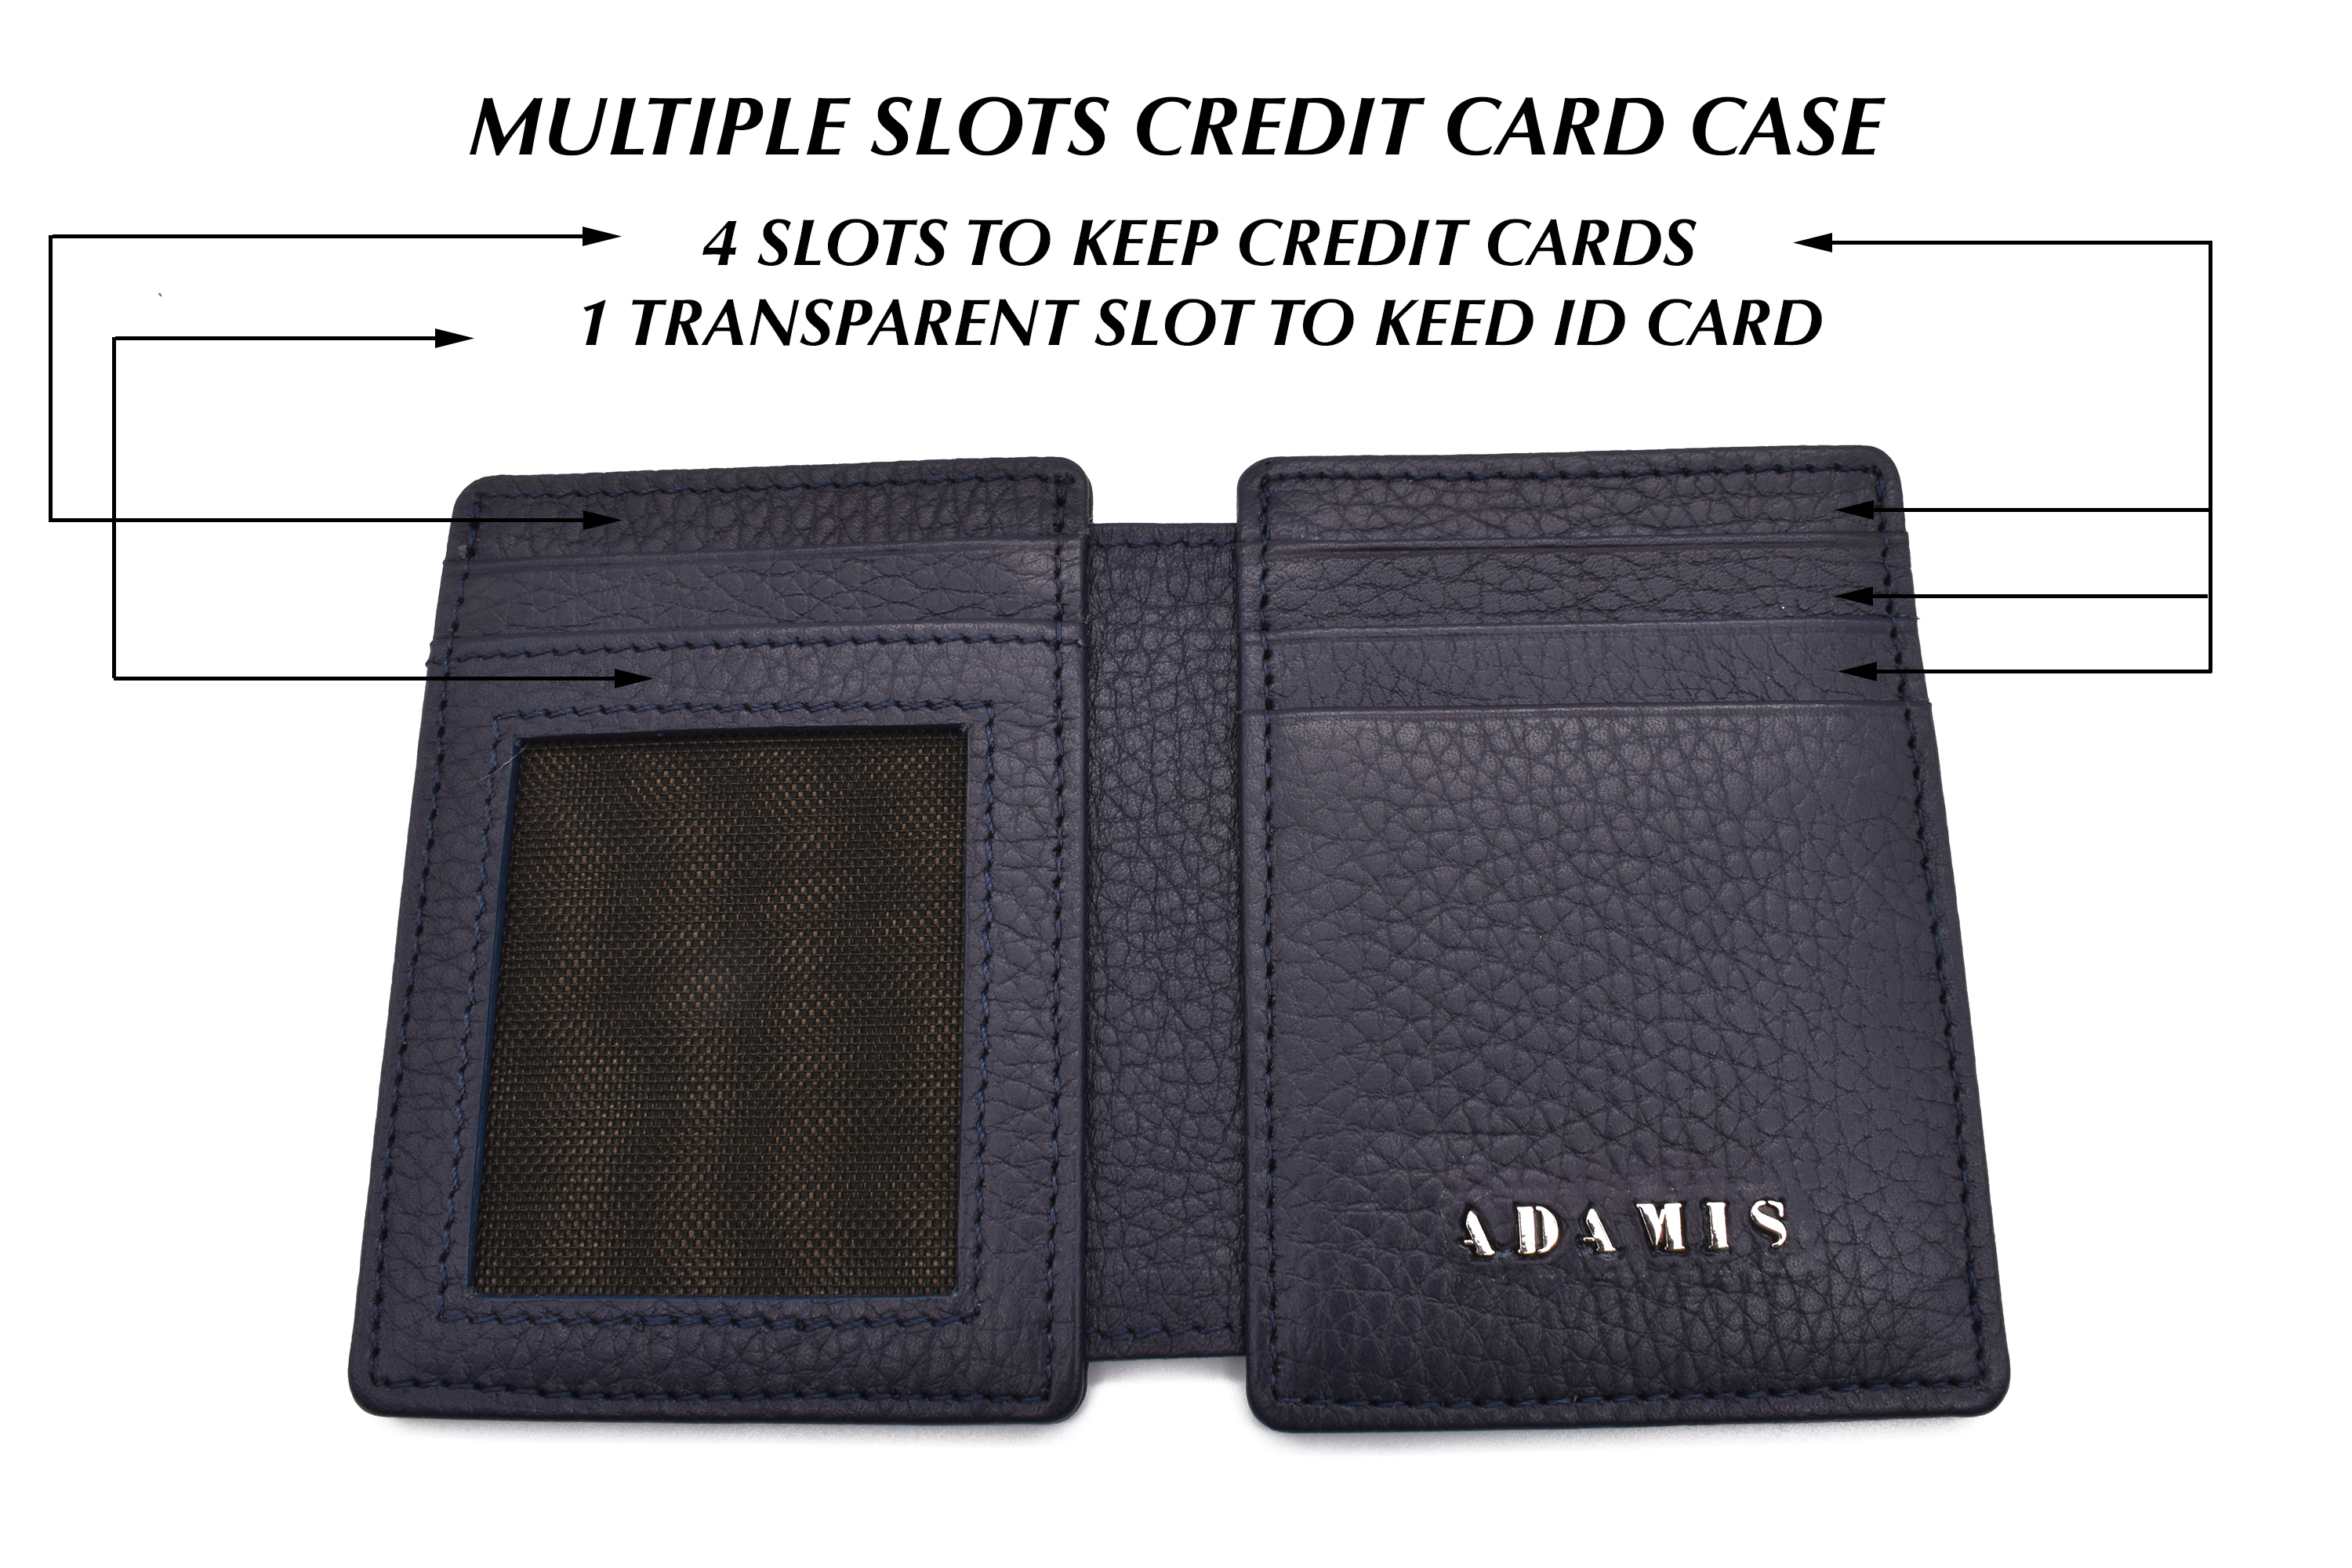 W339--Credit card case and magnetic money clip in genuine leather - Blue